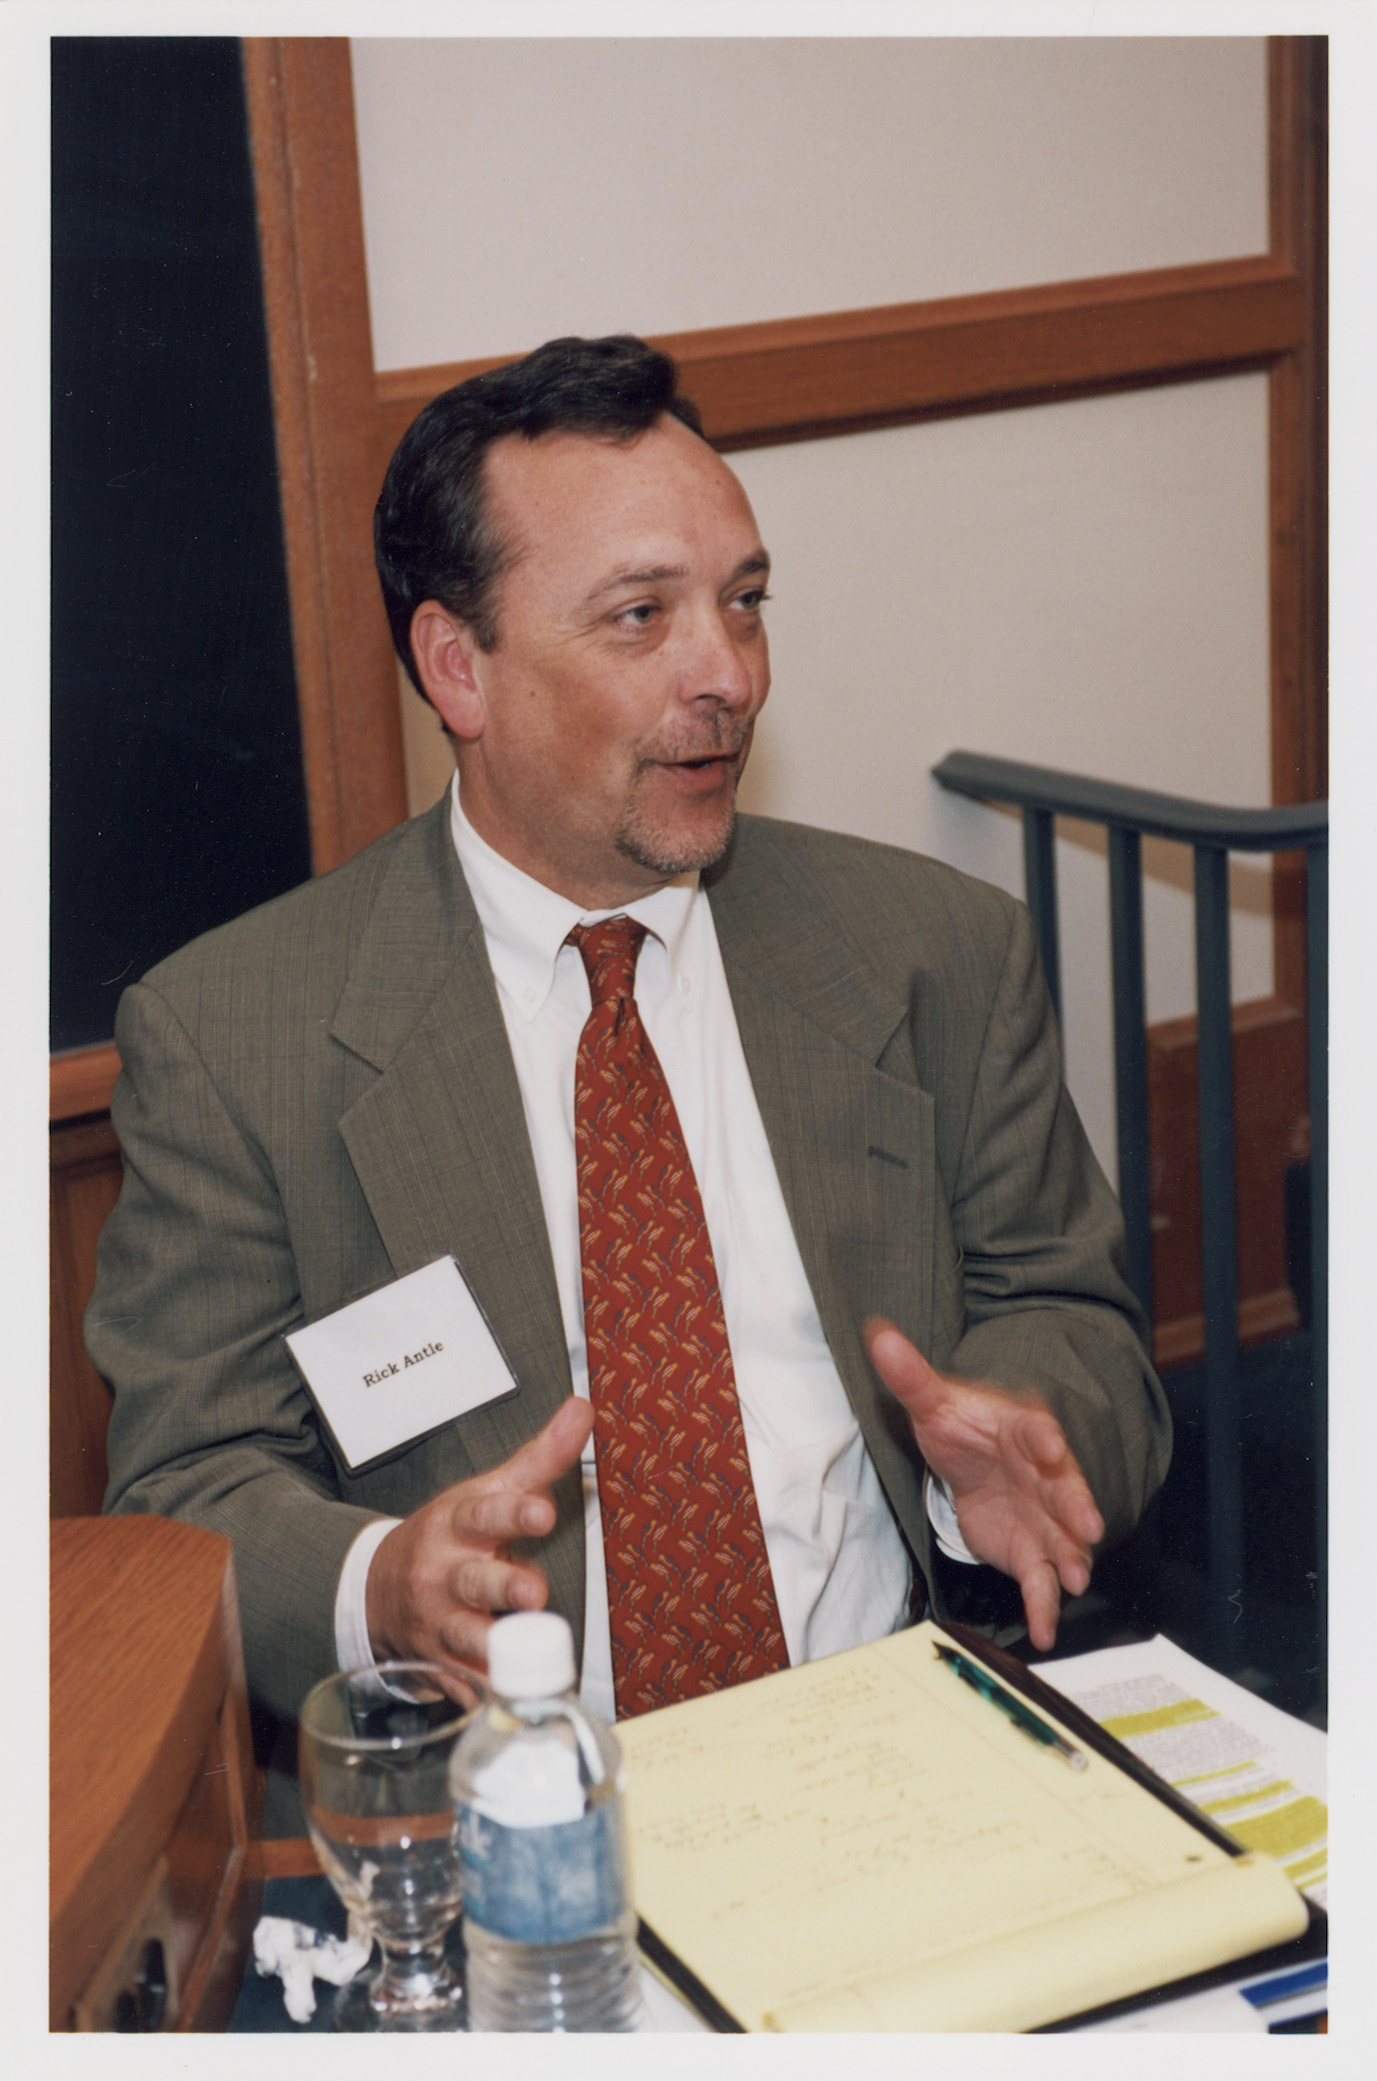 Yale SOM Associate Dean and Prof. Rick Antle